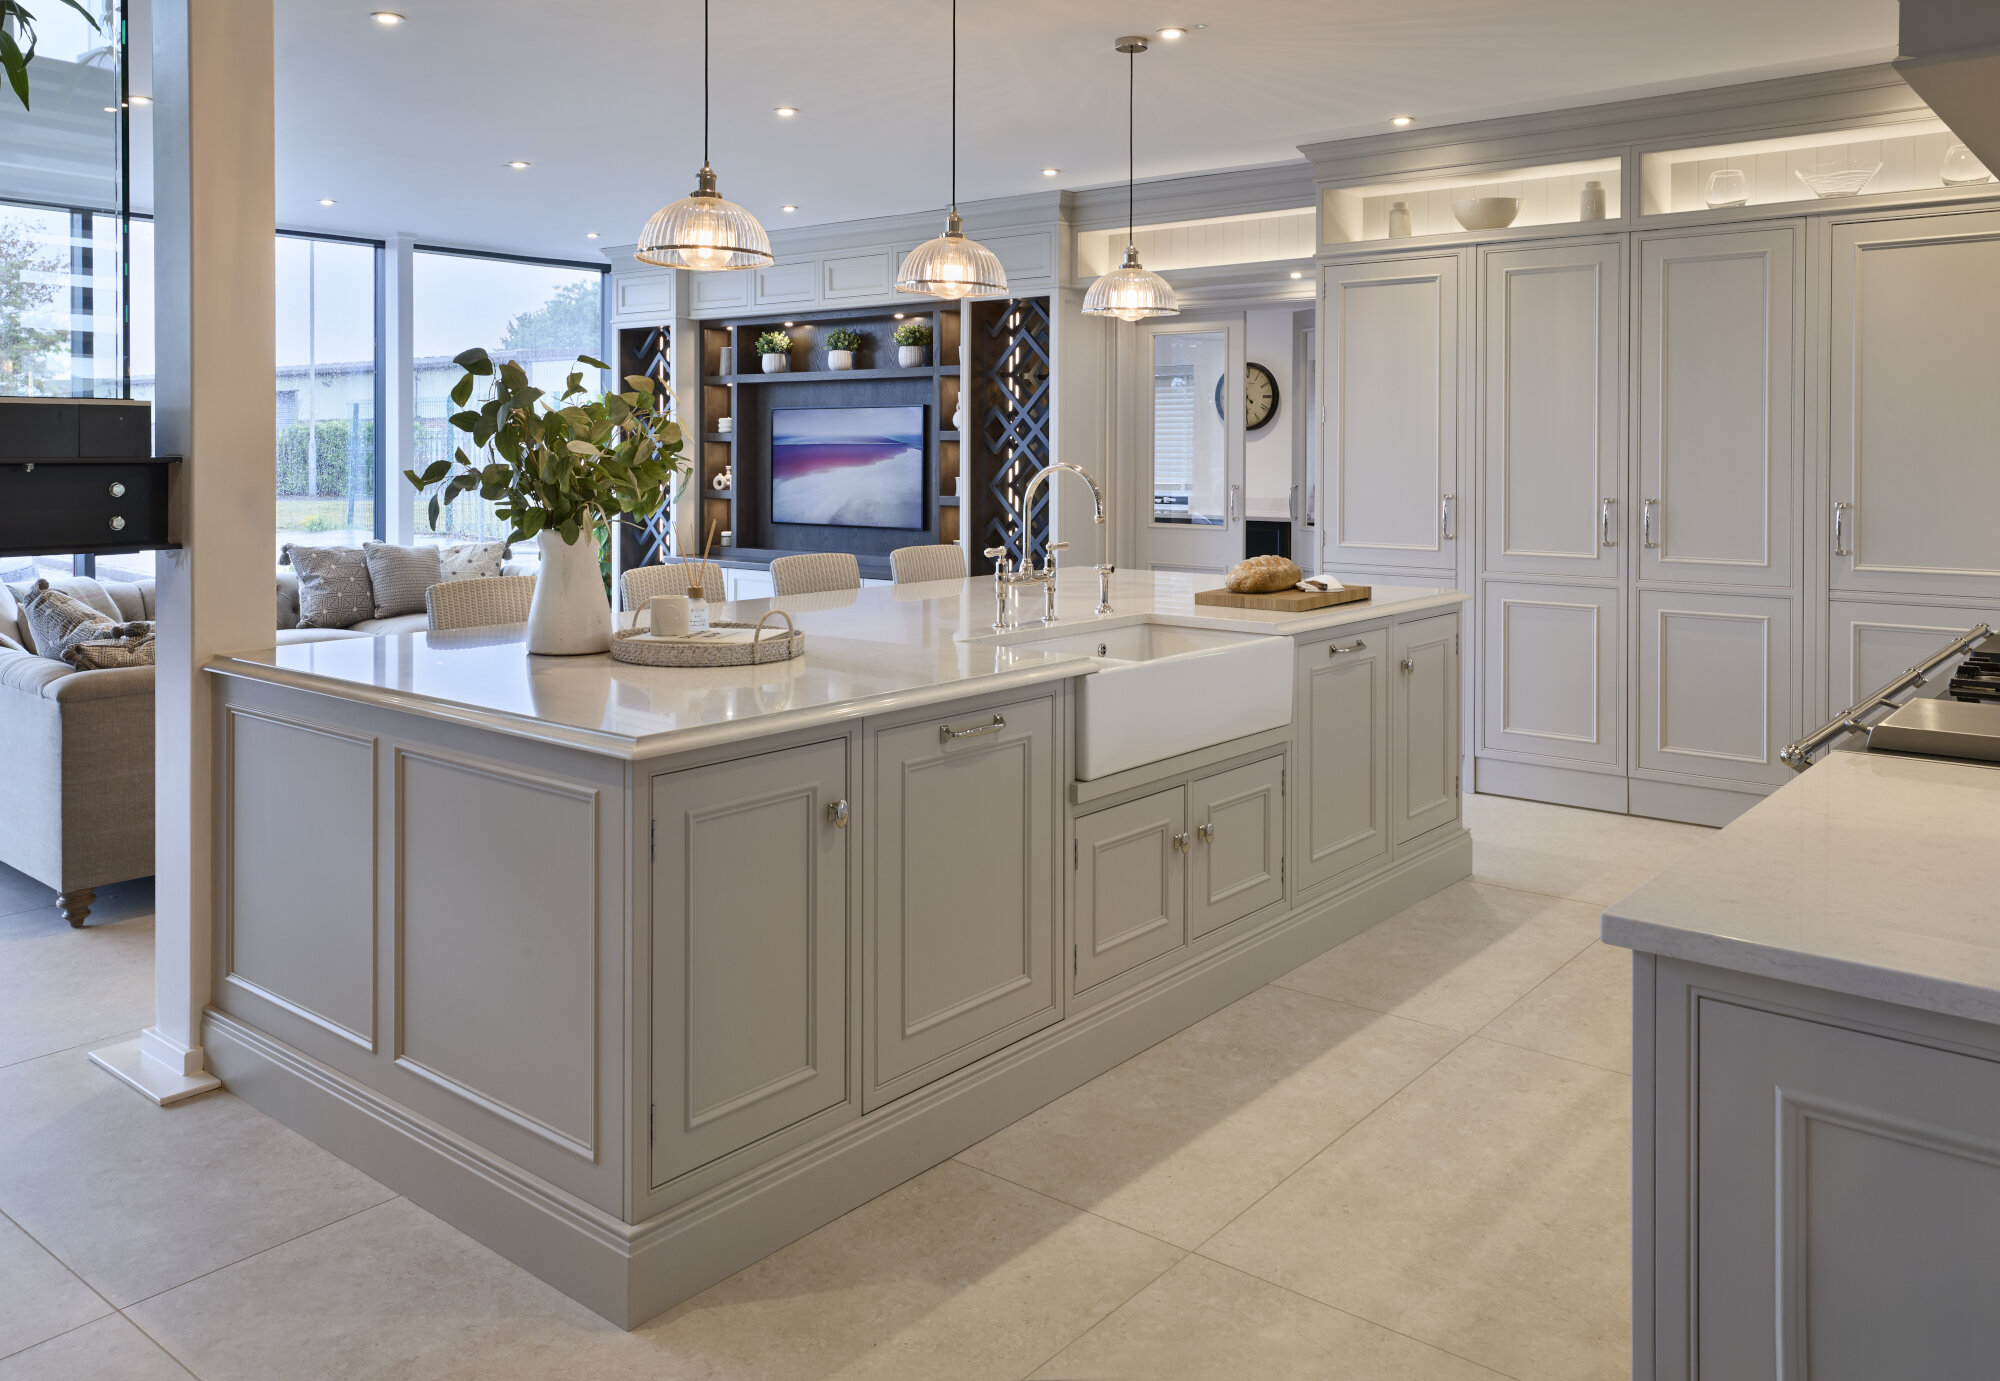 This Bespoke Kitchen Design is on display in our showroom near Stamford